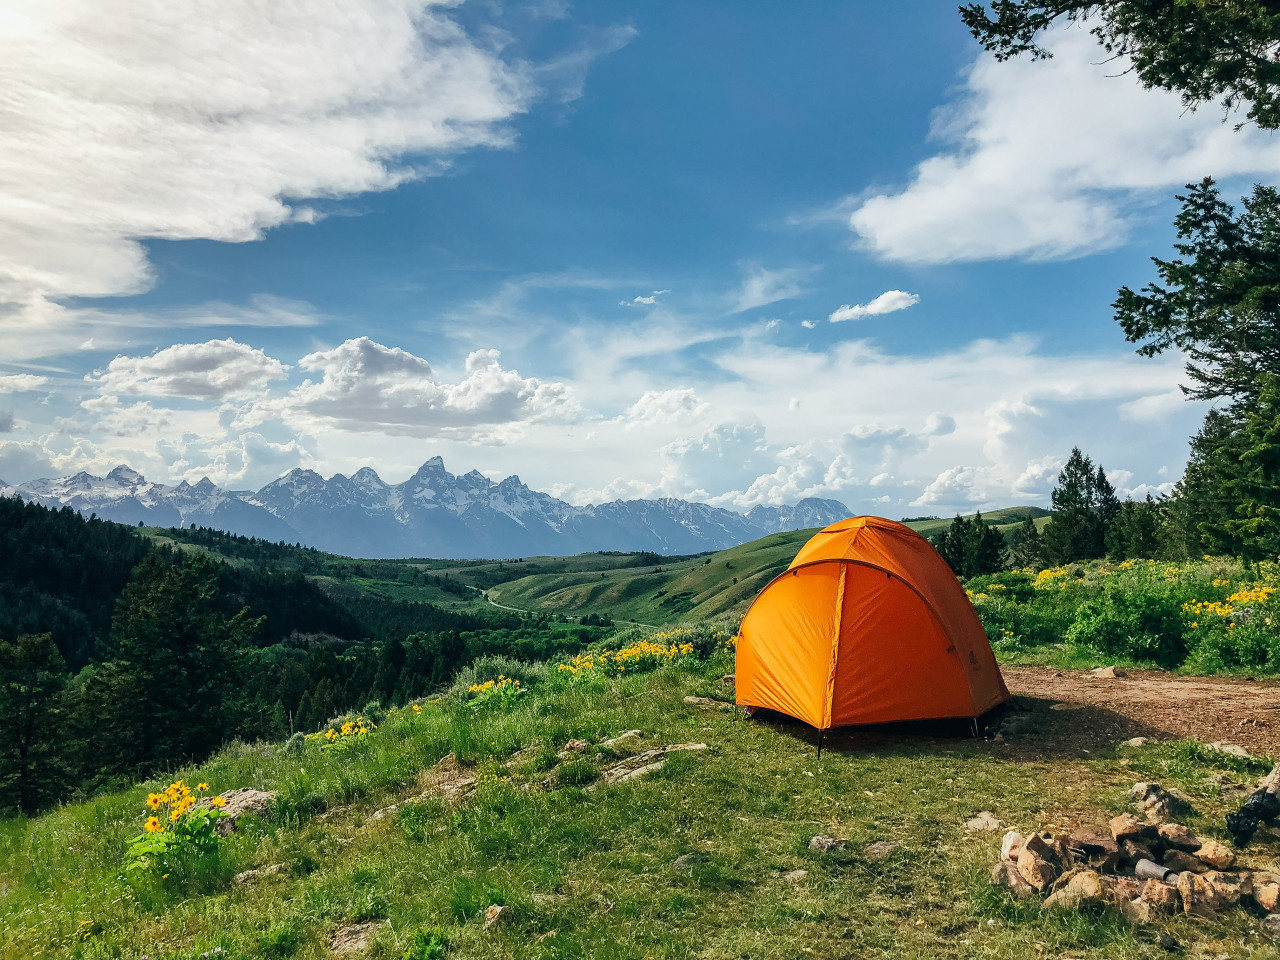 7 Vital Tips for Your First Solo Camping Adventure